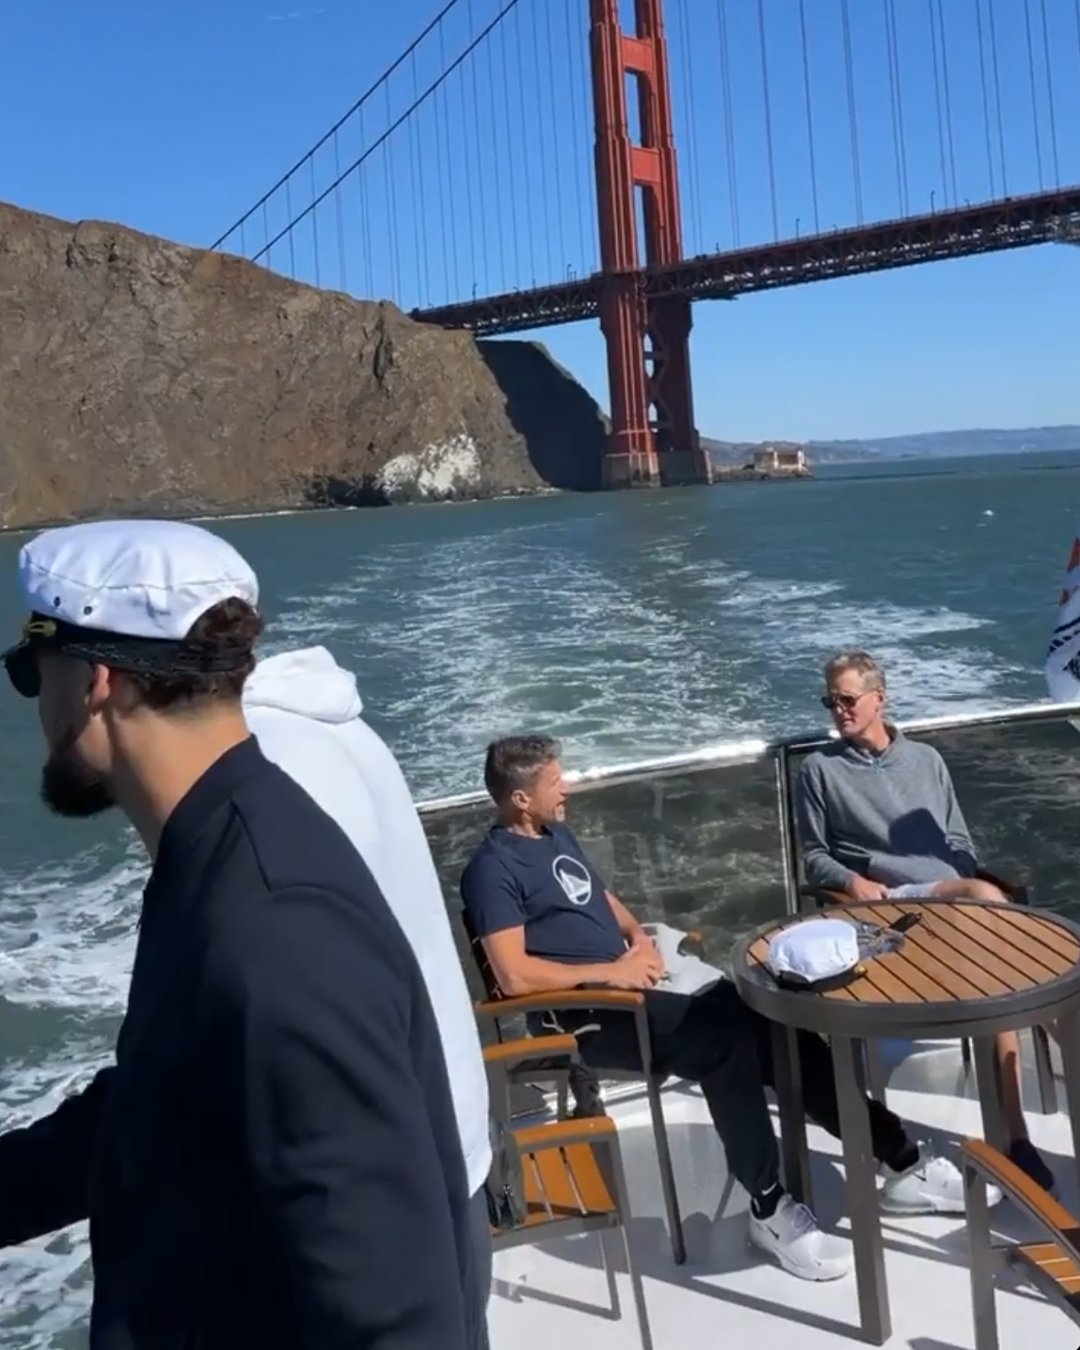 Klay Thompson captains hat earns him invitation to drive SF ferry